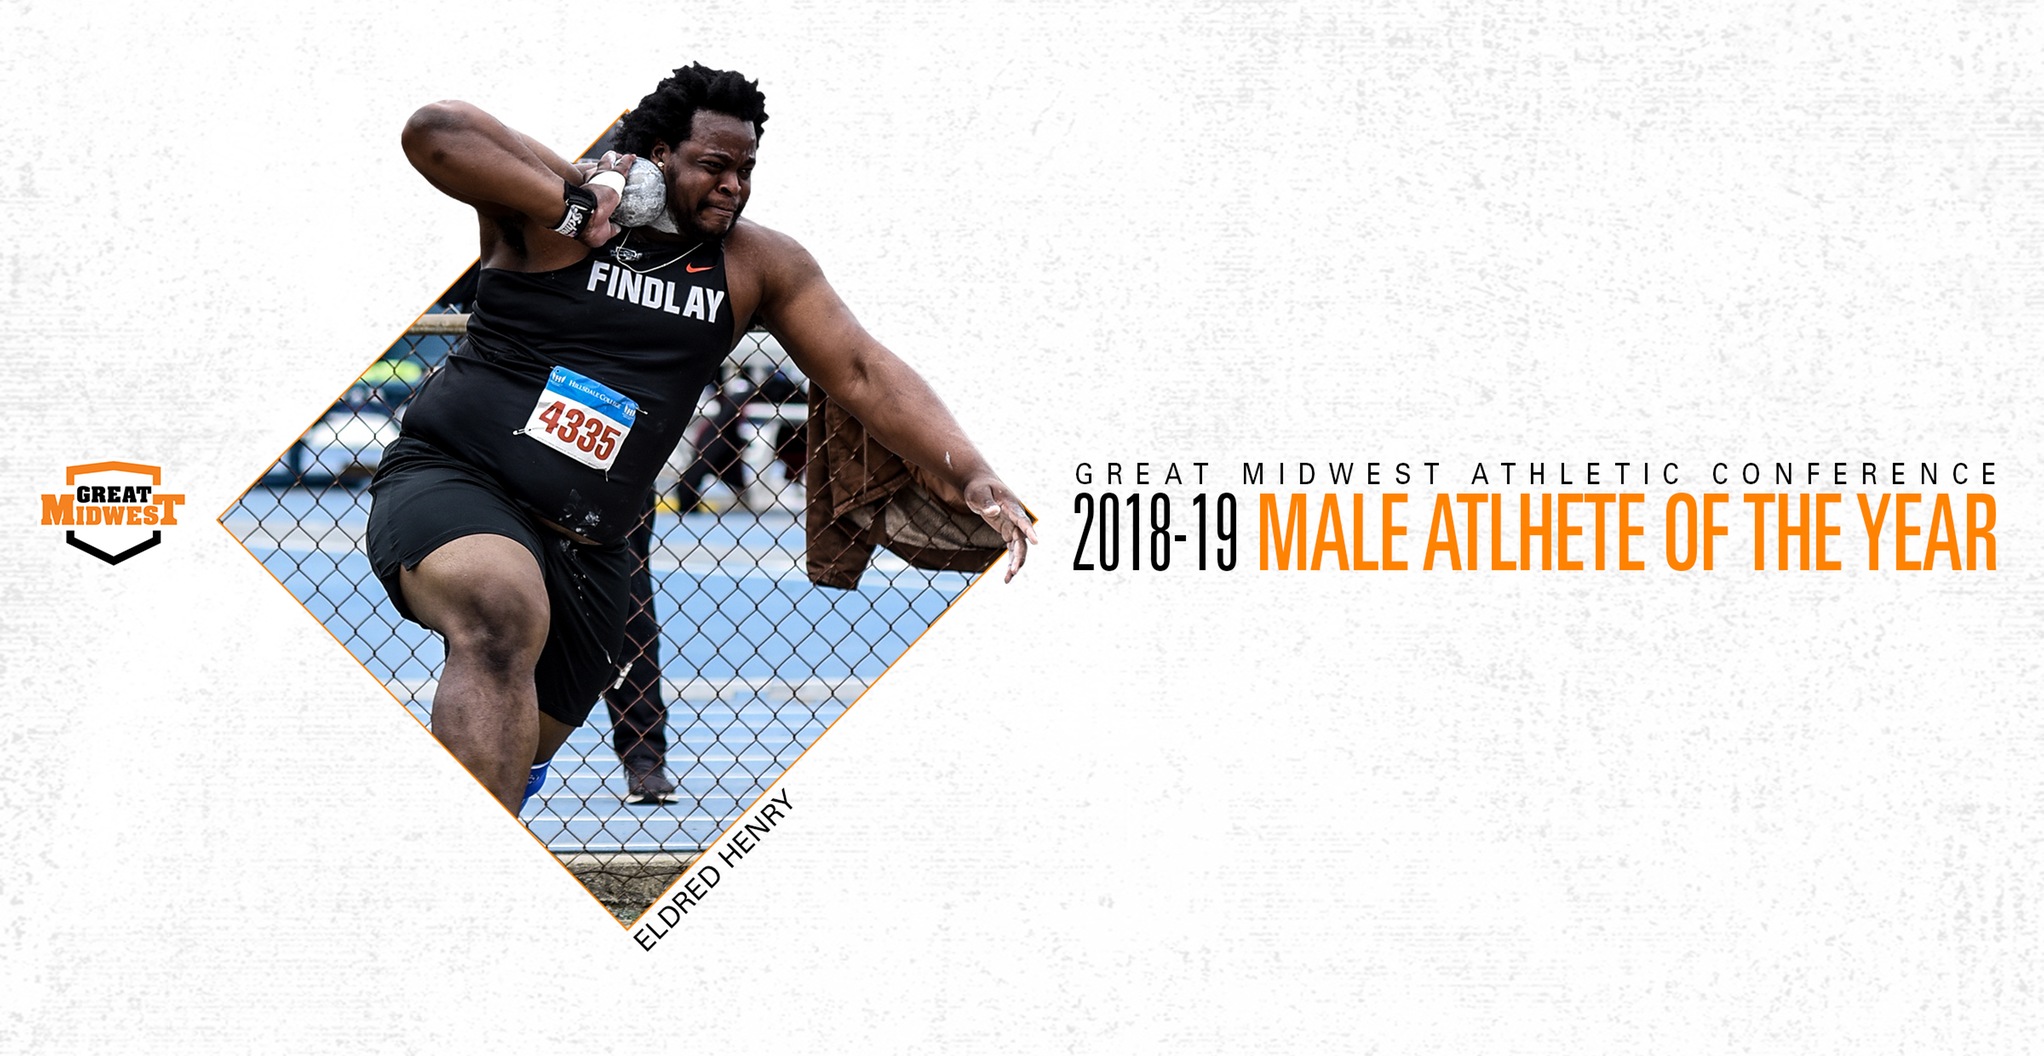 Henry Named G-MAC Male Athlete of the Year